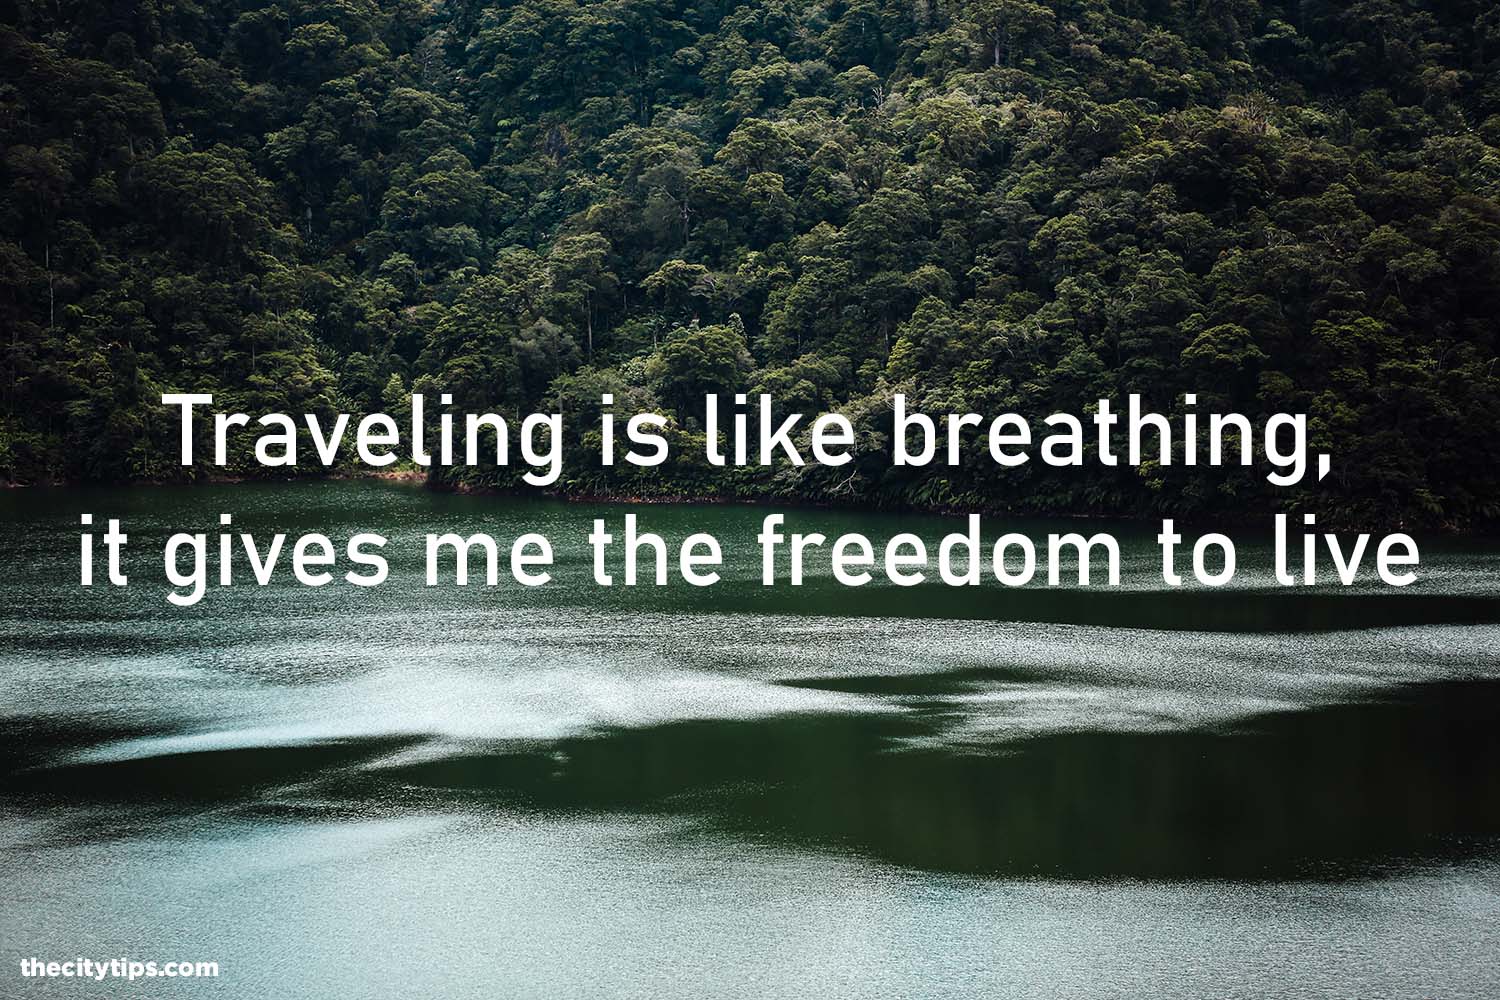 "Traveling is like breathing, it gives me the freedom to live."